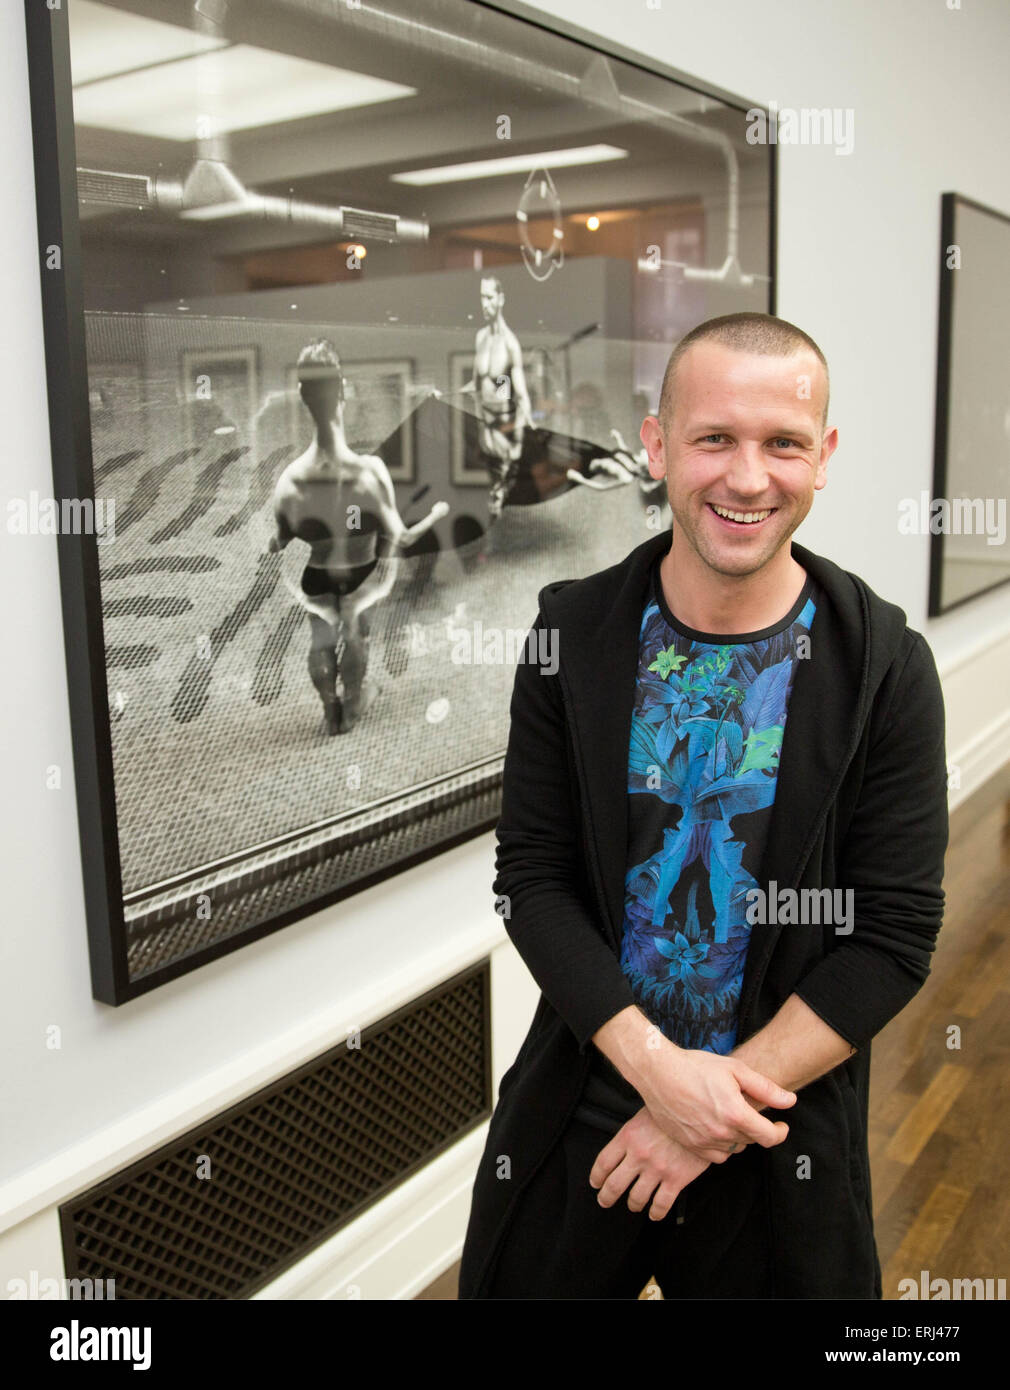 Berlin, Germany. 3rd June, 2015. Photographer Szymon Brodziak stands next to one of his photographic work during a press conference on the photo exhibition 'Newton. Horvat. Brodziak' at the Museum of Photography in Berlin, Germany, 3 June 2015. The exhibition showcases the photographic works of Helmut Newton, Frank Horvat and Szymon Brodziak und runs until 15 November 2015. Photo: JOERG CARSTENSEN/dpa/Alamy Live News Stock Photo